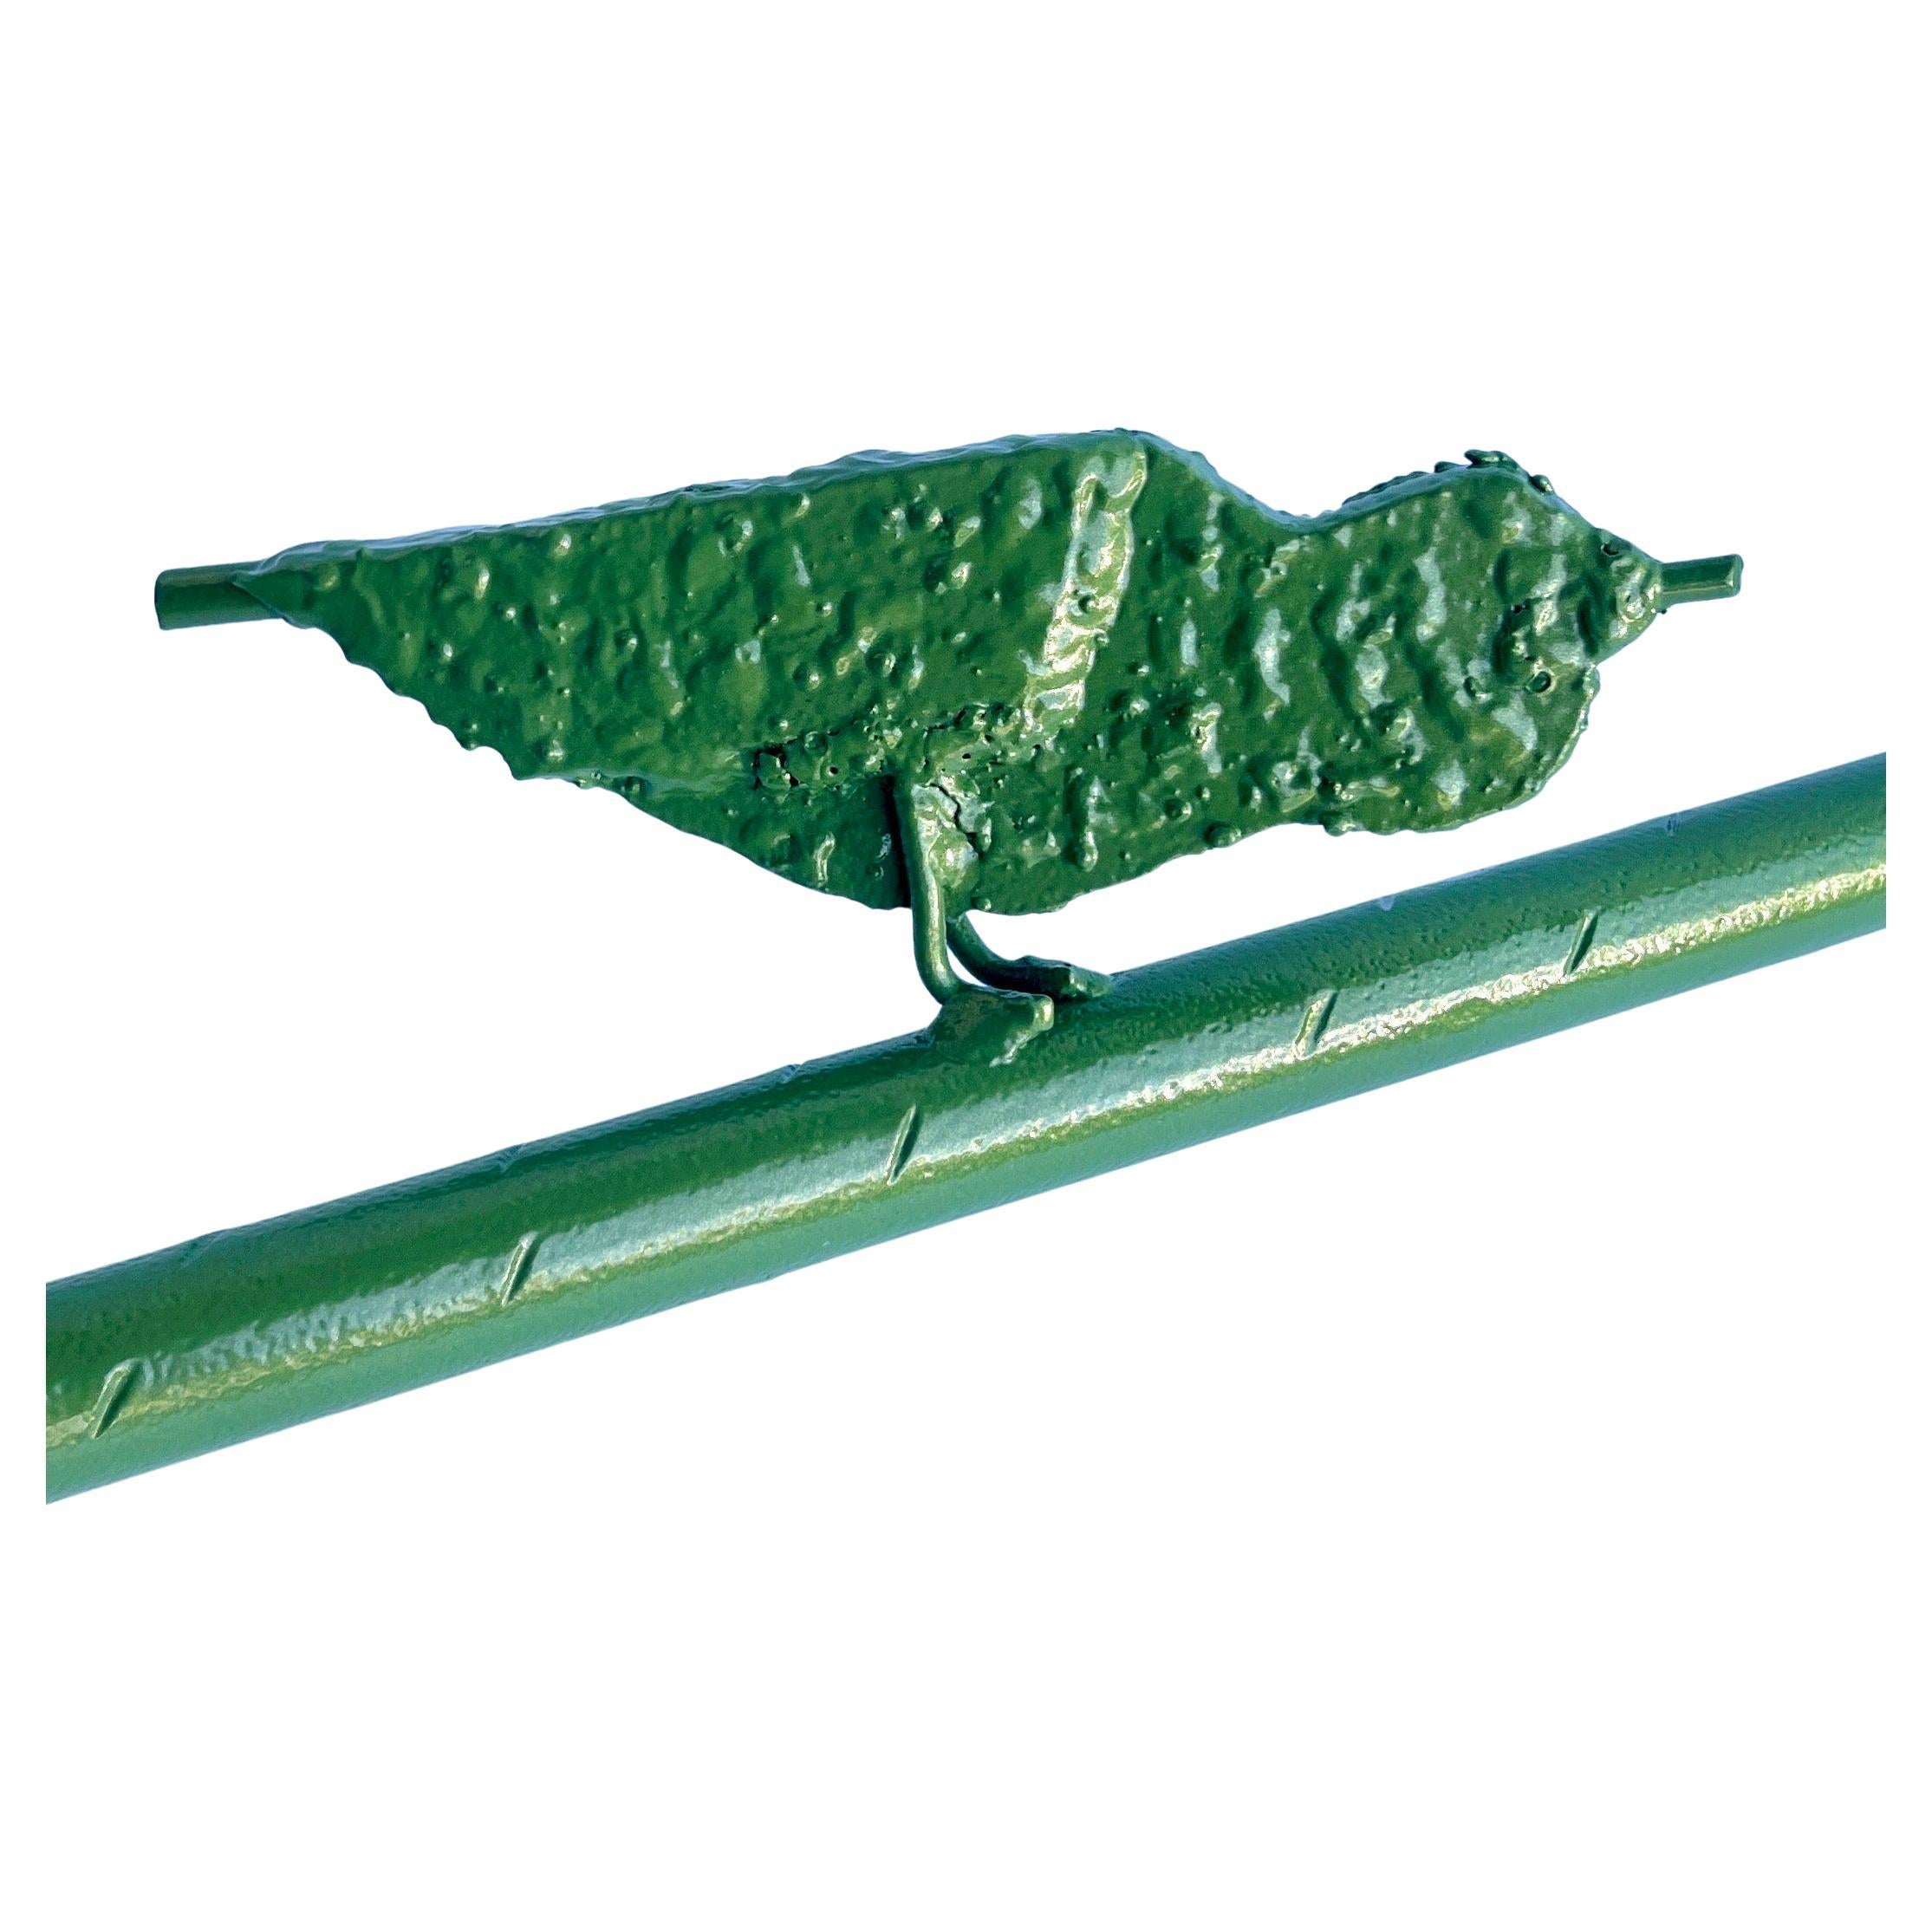 Late 20th Century Hand-Crafted Iron Wall Bar Rod With Birds, Green Powder-Coated For Sale